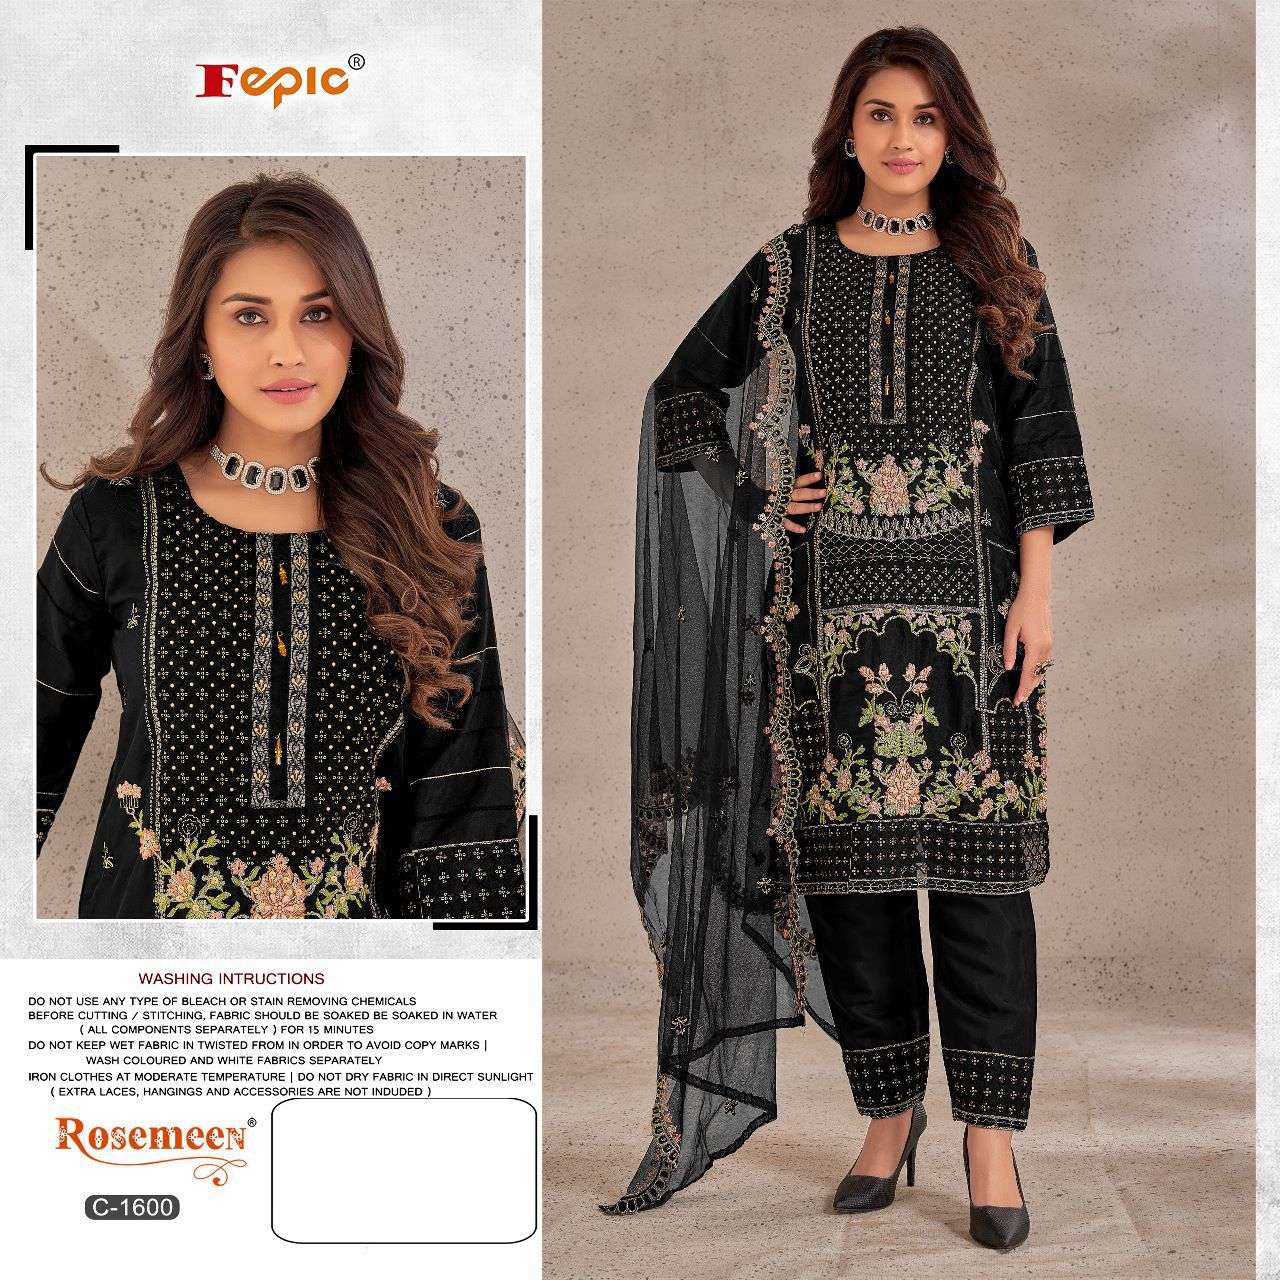 FEPIC ROSEMEEN 1600 ORGANZA EMBROIDERY WORK PAKISTANI SUITS ...